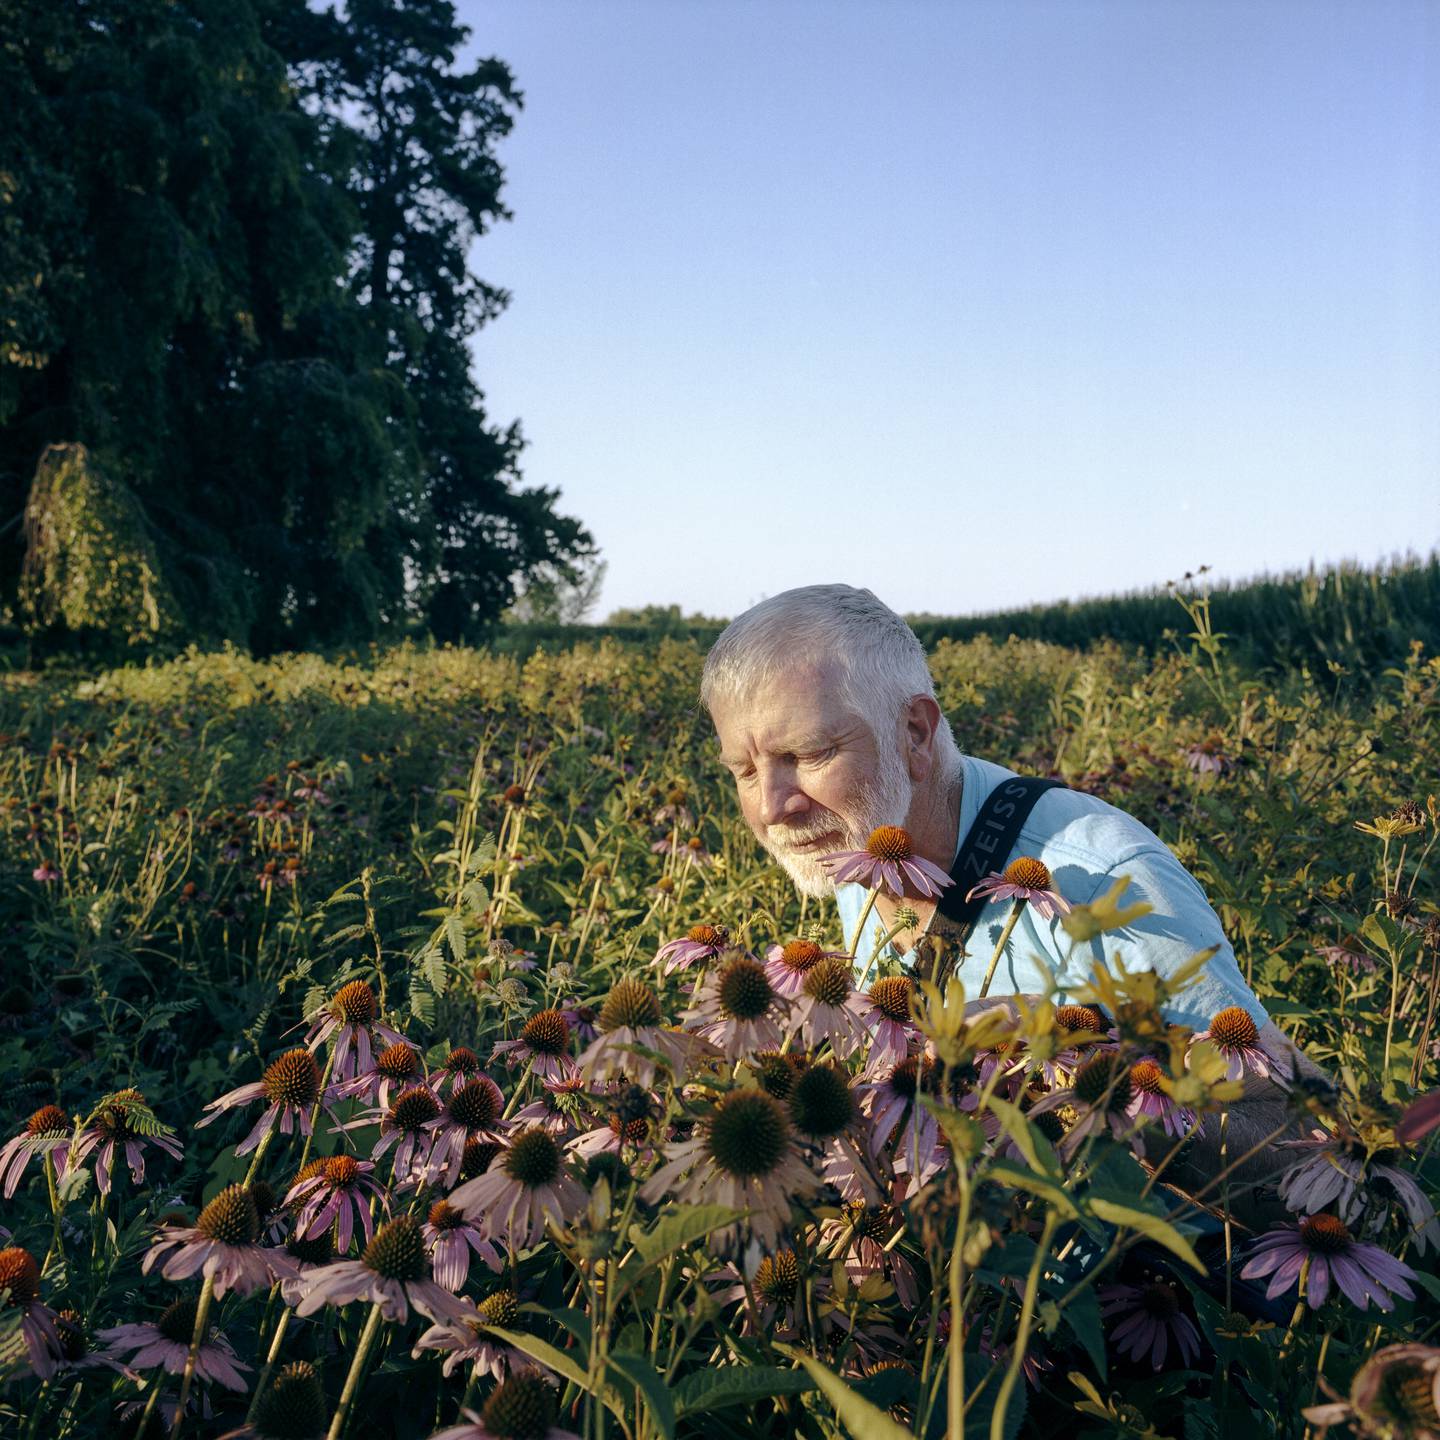 Jon Shaw observes a bee in the wild flower buffer between the front yard of the house and the chemically treated cornfield at Emory Farm on August 3rd, 2022 in Queenstown Maryland.  The natural buffer was planted as a precaution after Anne Haberton developed cancer.